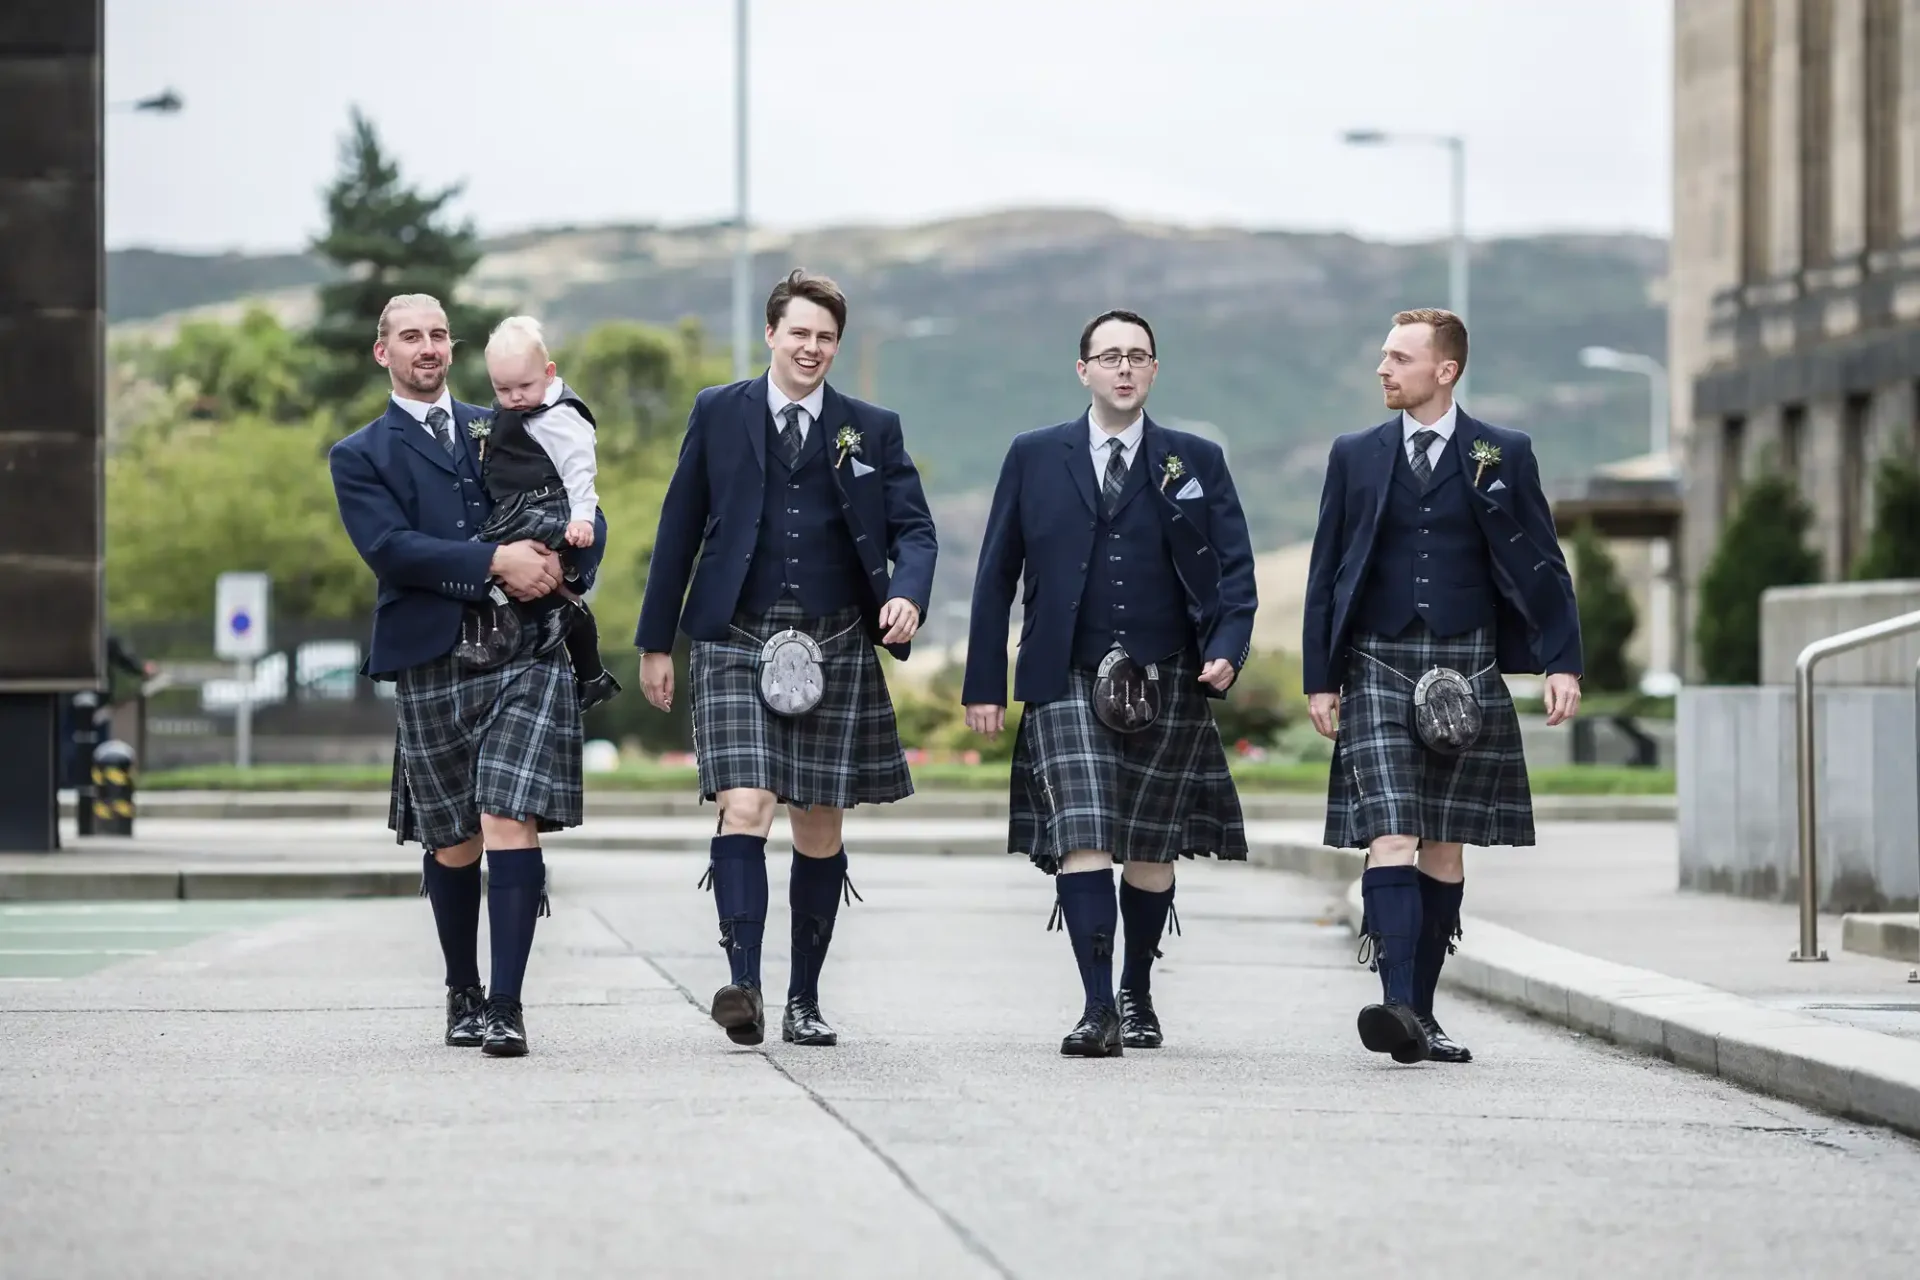 Four men and a baby wearing traditional scottish kilts and jackets walking on a paved path, with urban buildings in the background.